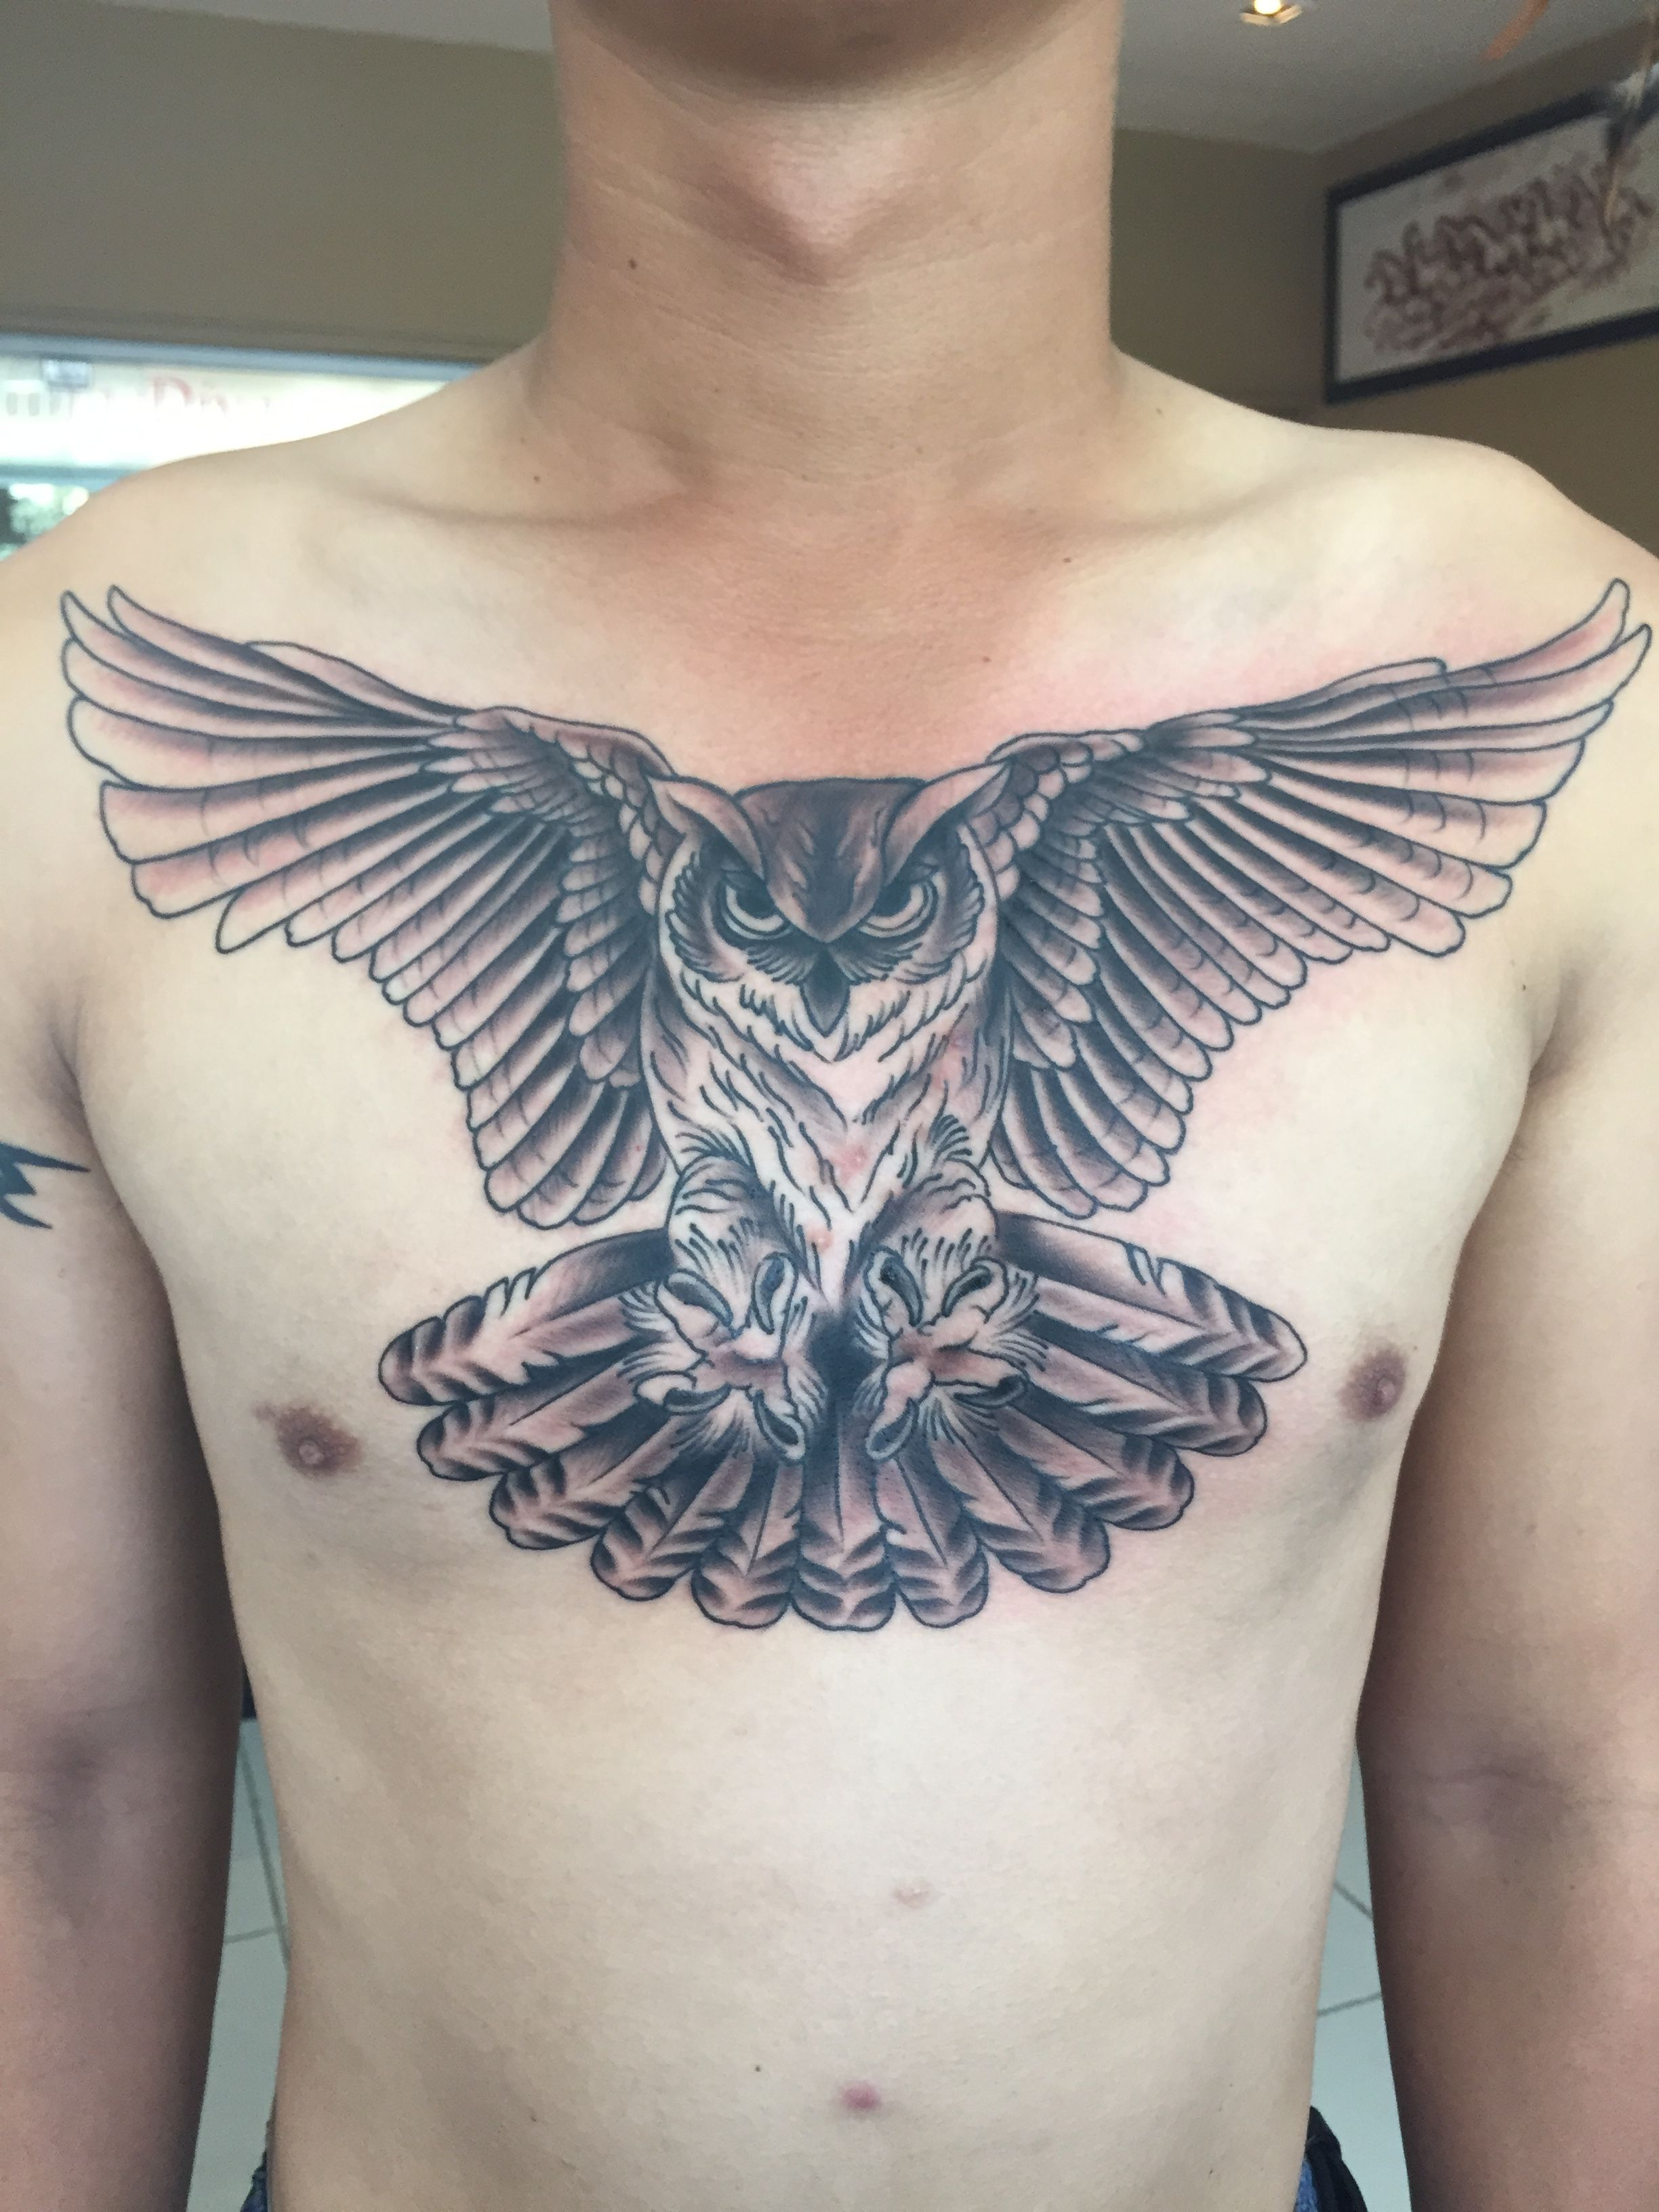 Full Chest Piece Black And Grey Owl Tattoofor Further Inquiries within size 2448 X 3264